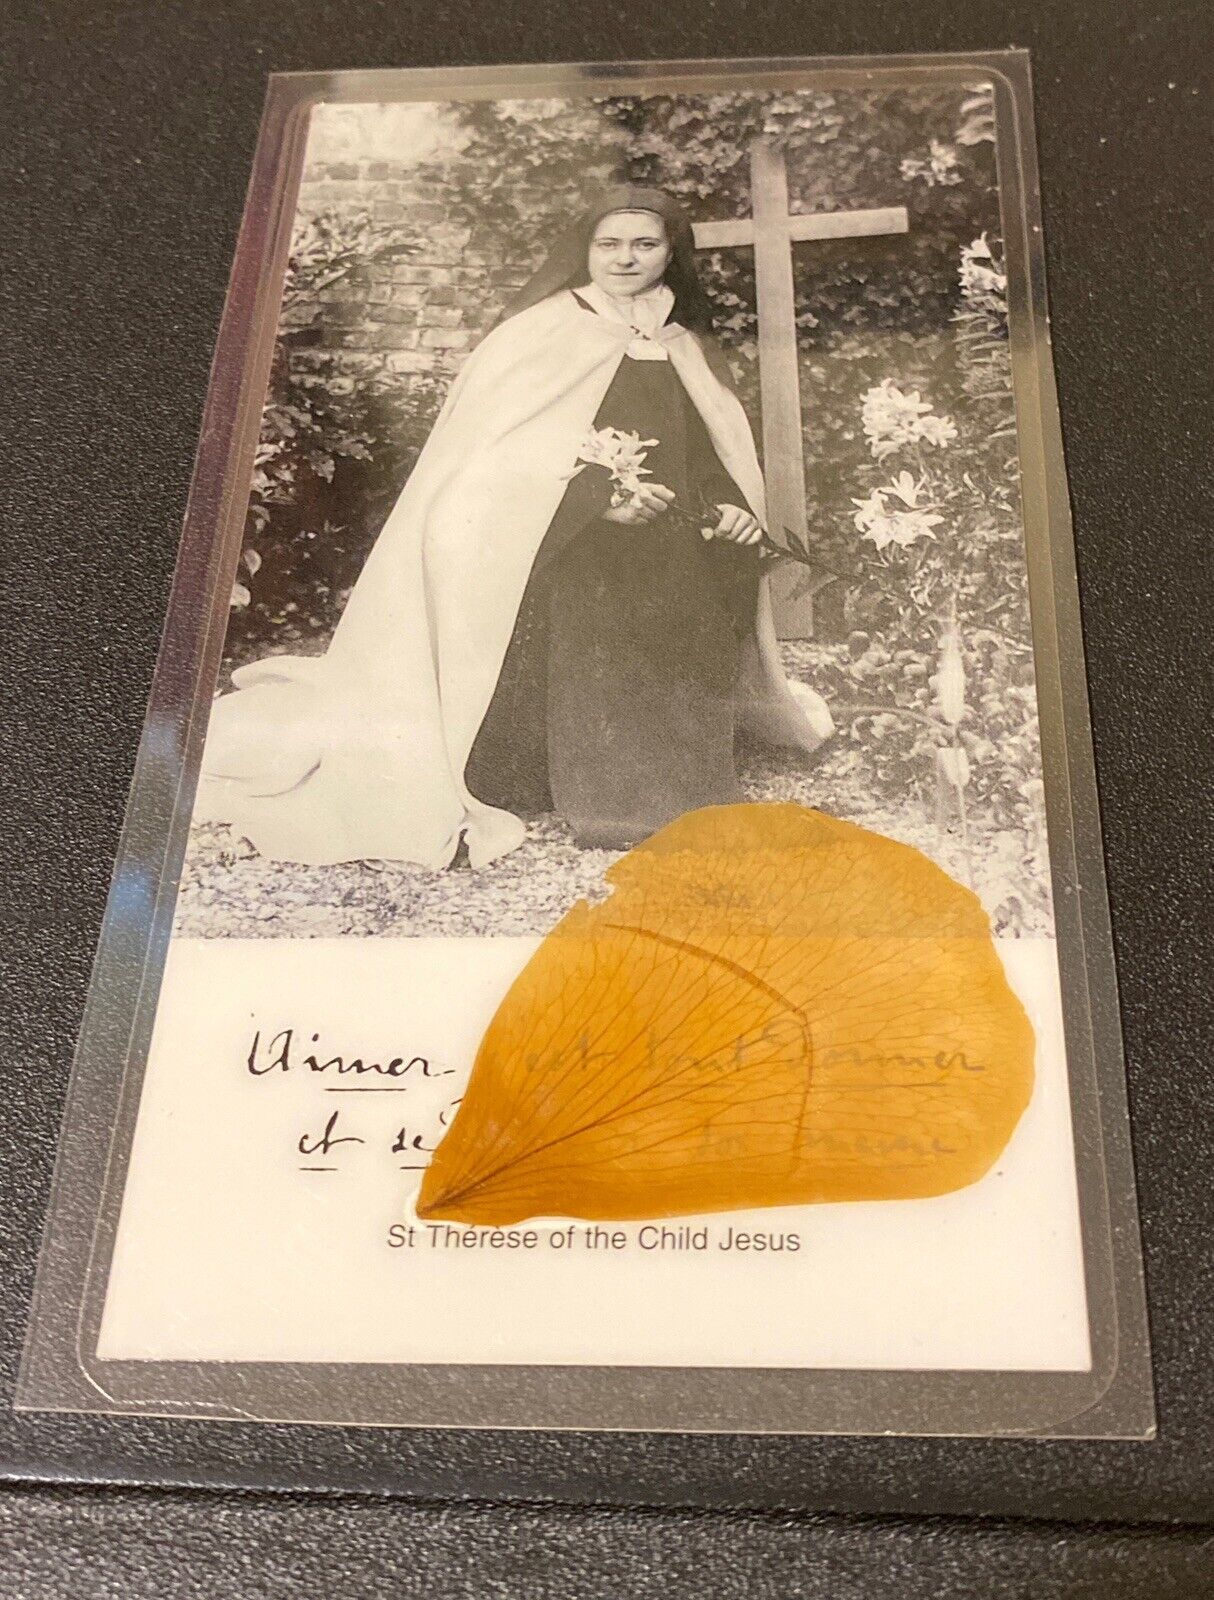 A Rare Relic Of St.Thérèse A Picture And Rose petal Touched To Her Reliquary